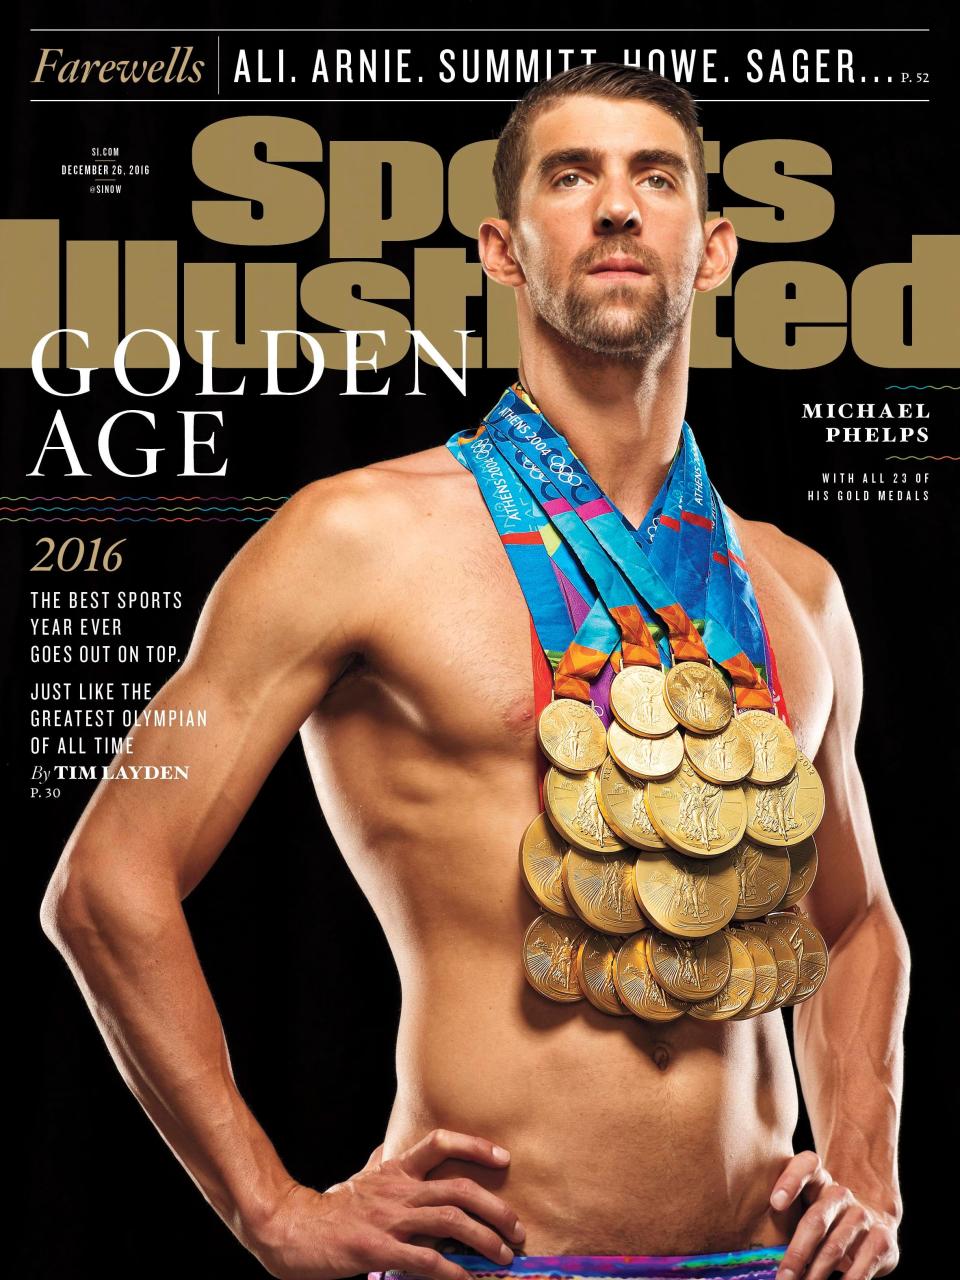 Michael Phelps 2016 Sports Illustrated cover.